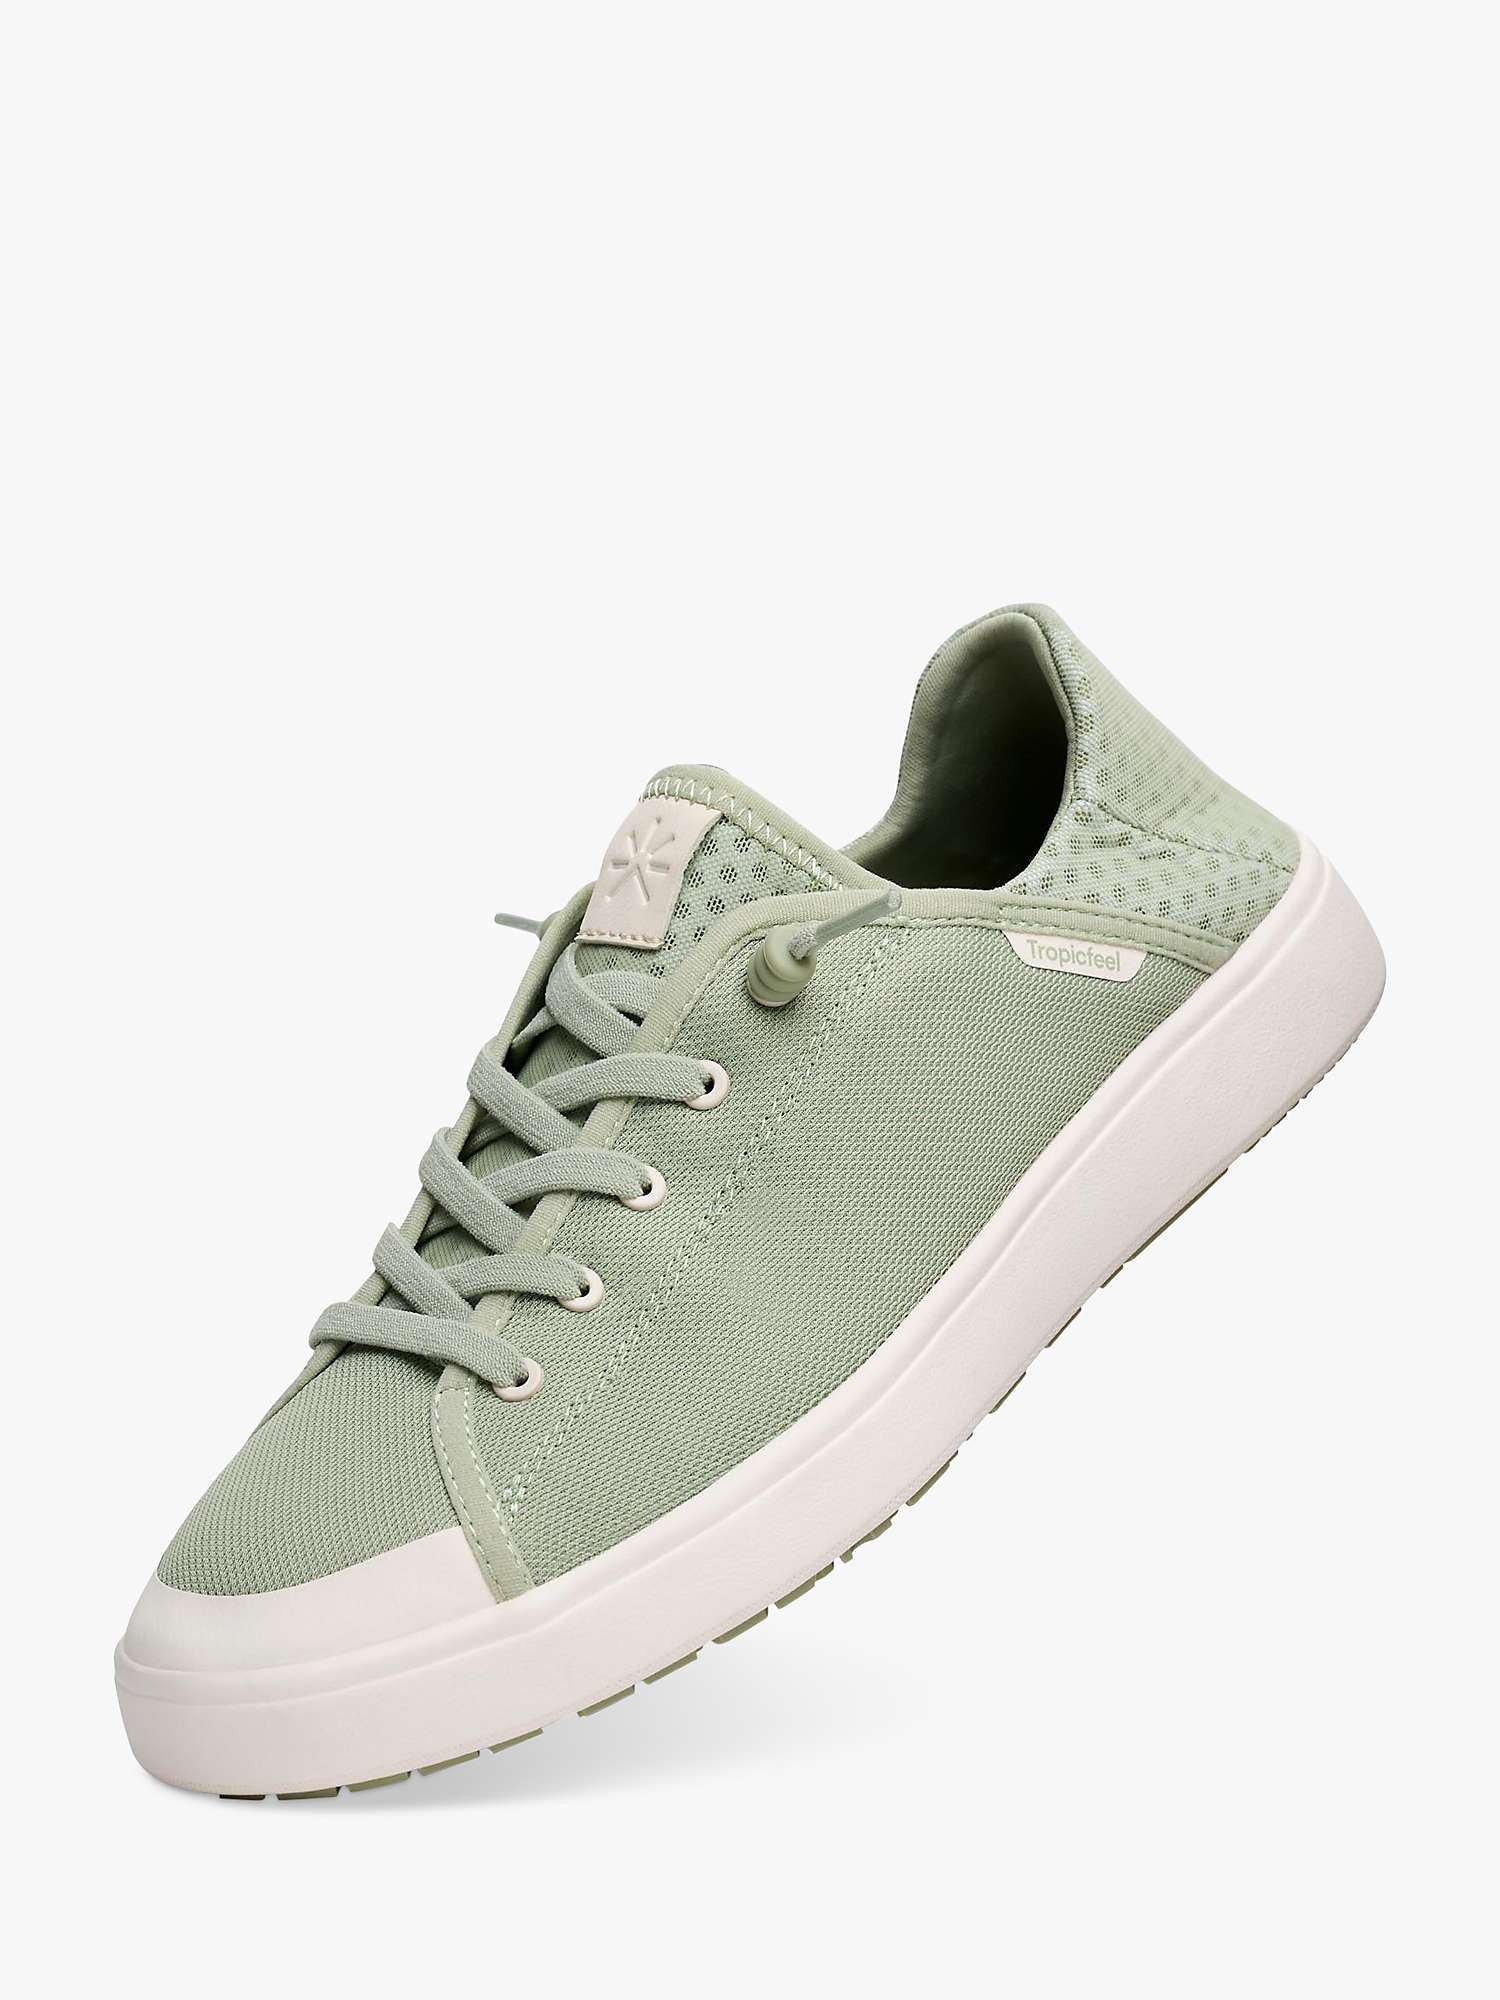 Buy Tropicfeel Sunset All-terrain Recycled Trainers Online at johnlewis.com